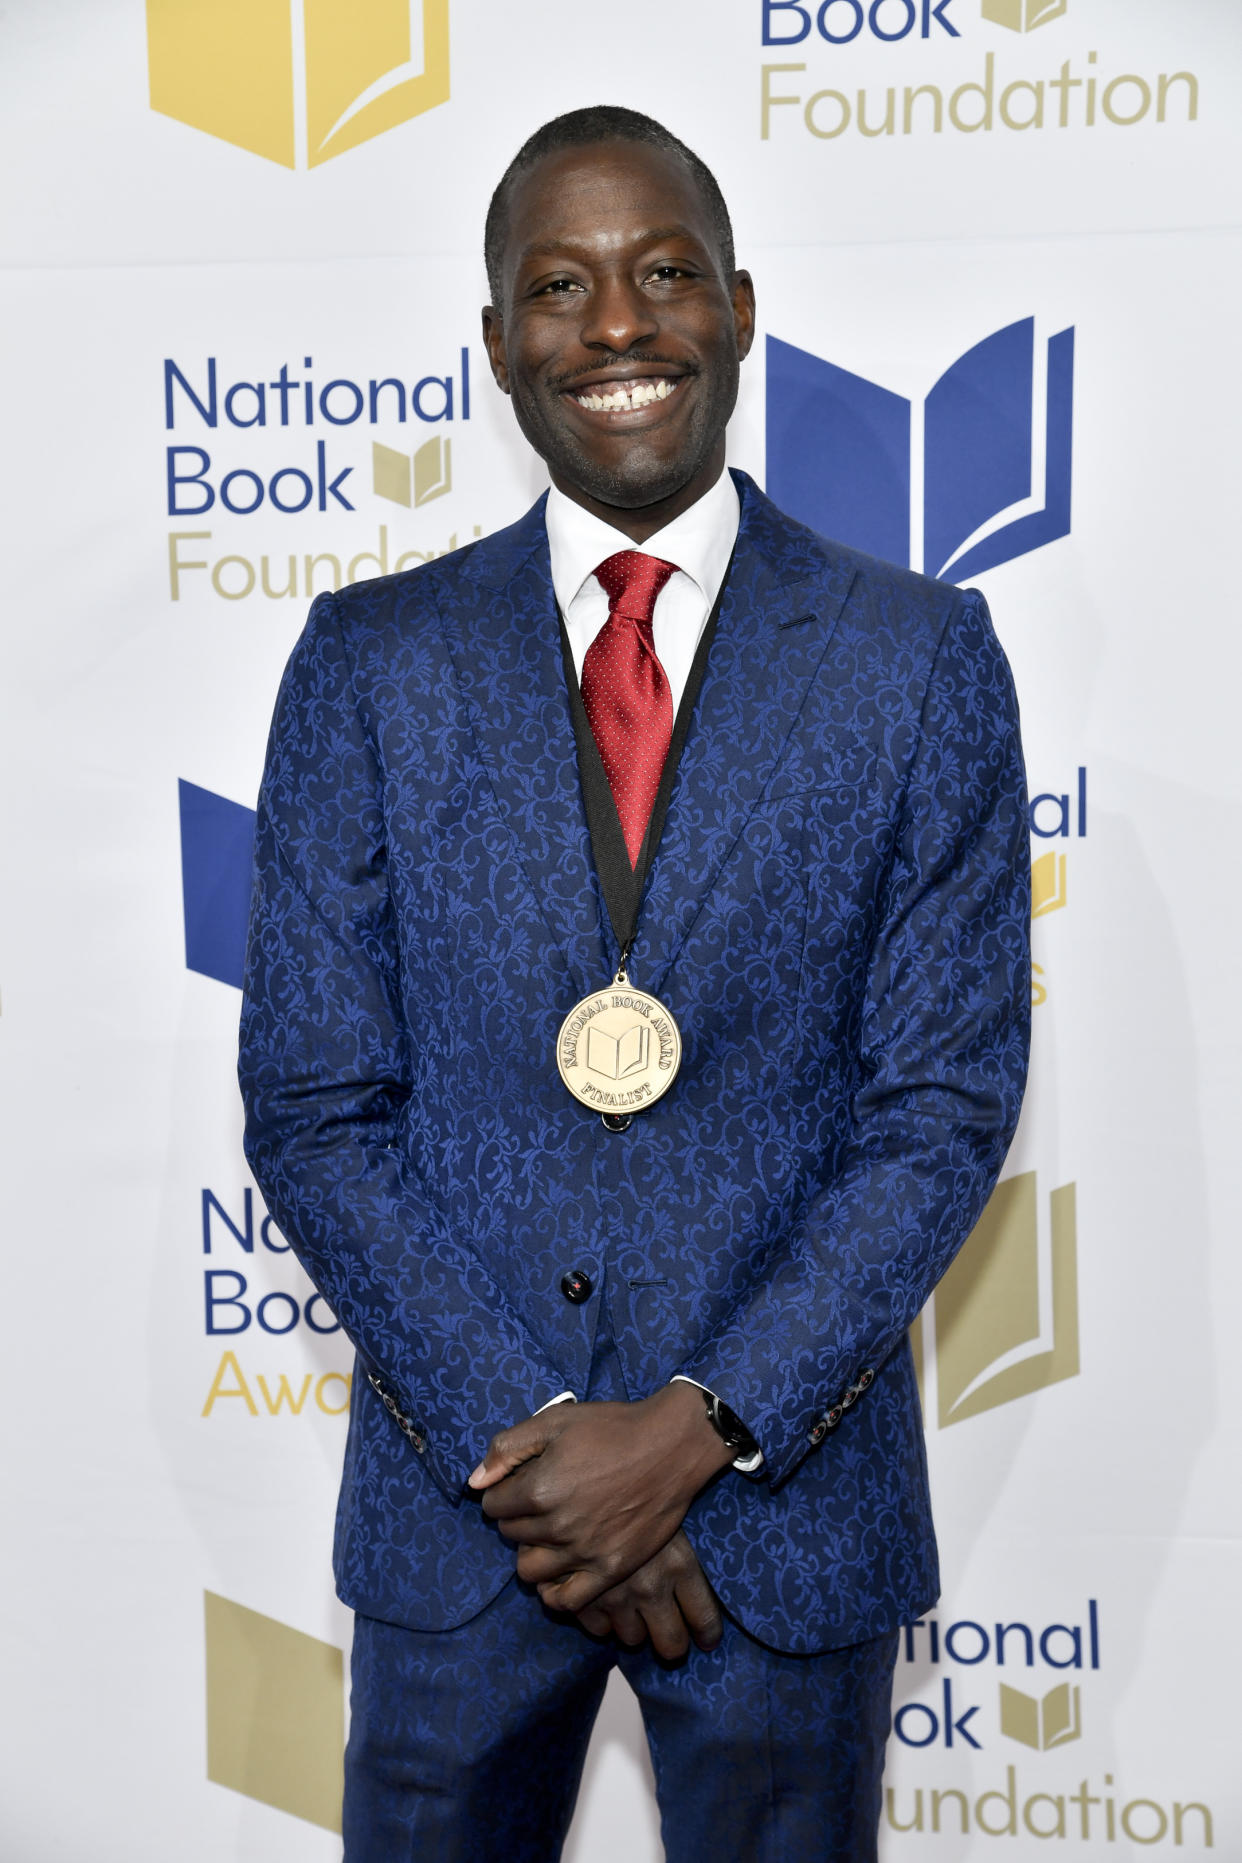 Poetry finalist Roger Reeves attends the 73rd National Book Awards, at Cipriani Wall Street on Wednesday, Nov. 16, 2022, in New York. (Photo by Evan Agostini/Invision/AP)